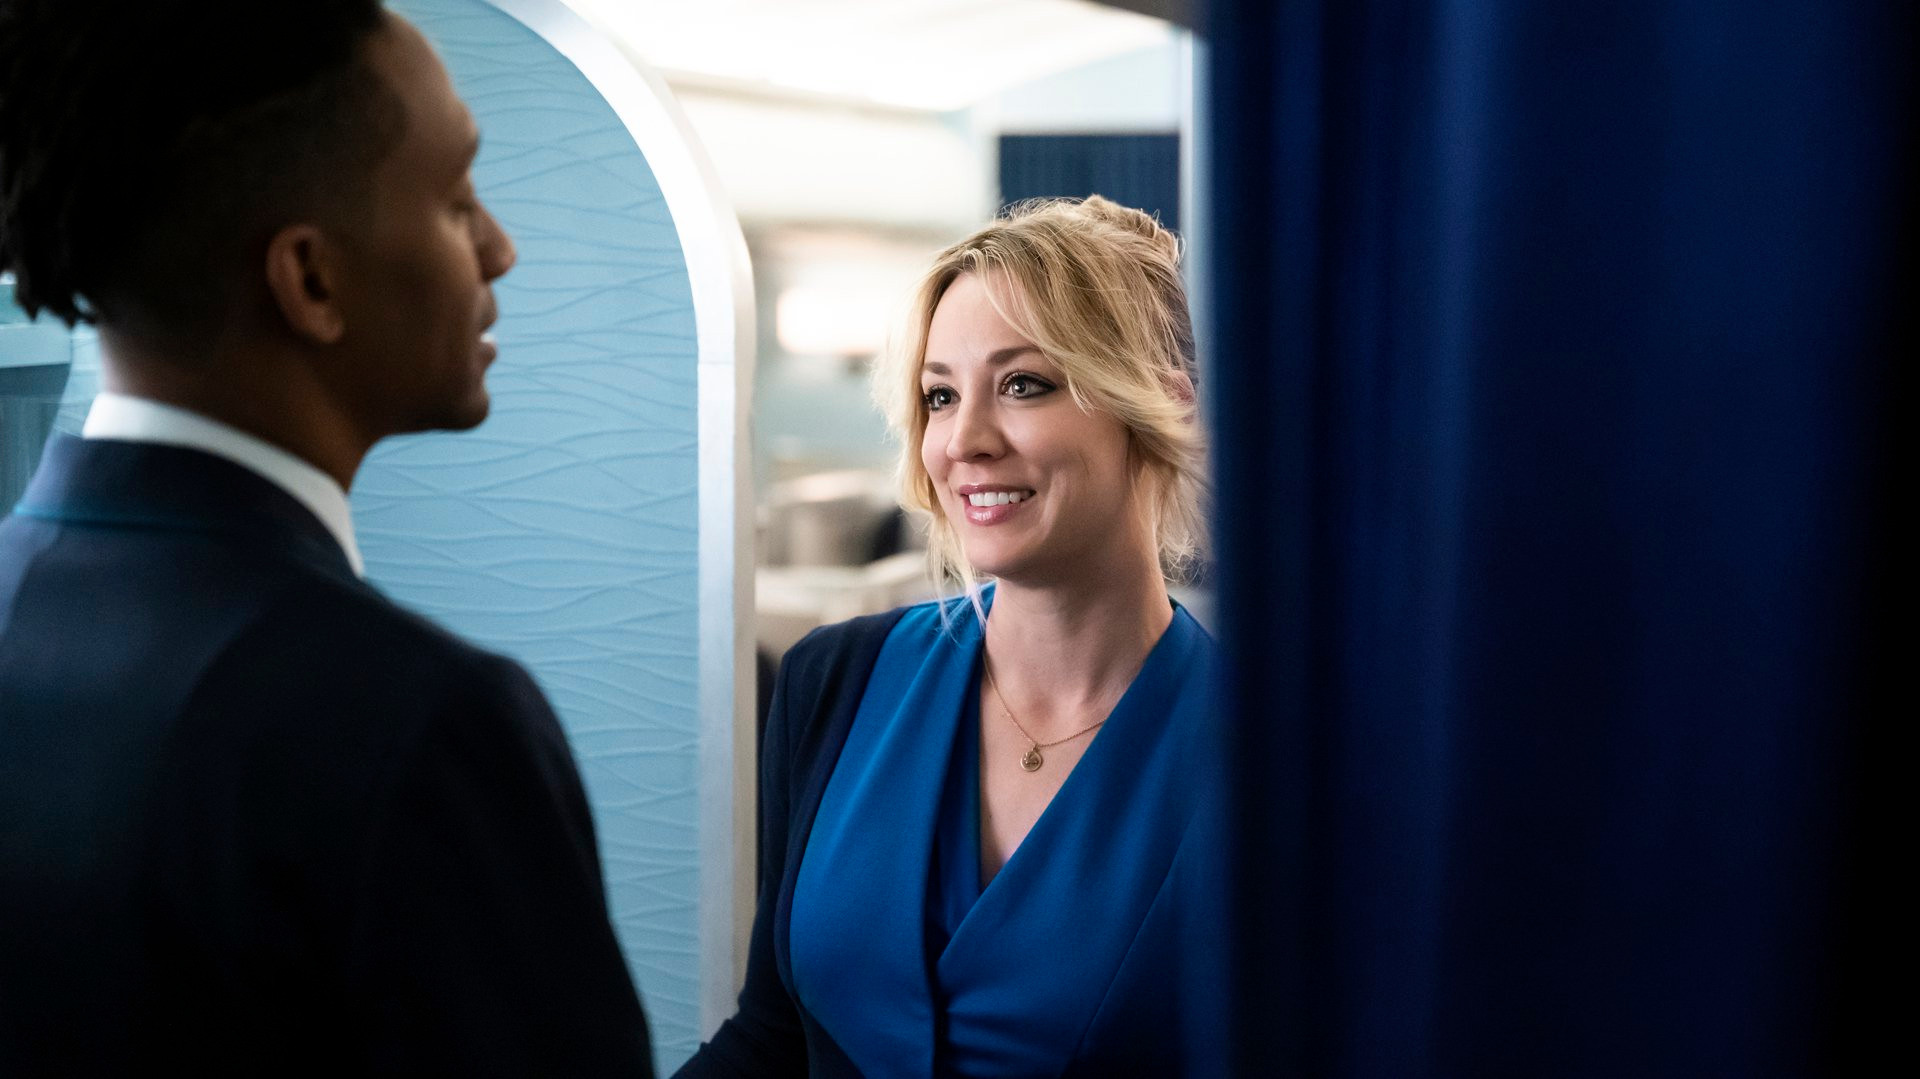 Kaley Cuoco and The Flight Attendant cast soar with SAG Award nominations: ‘There are no words’